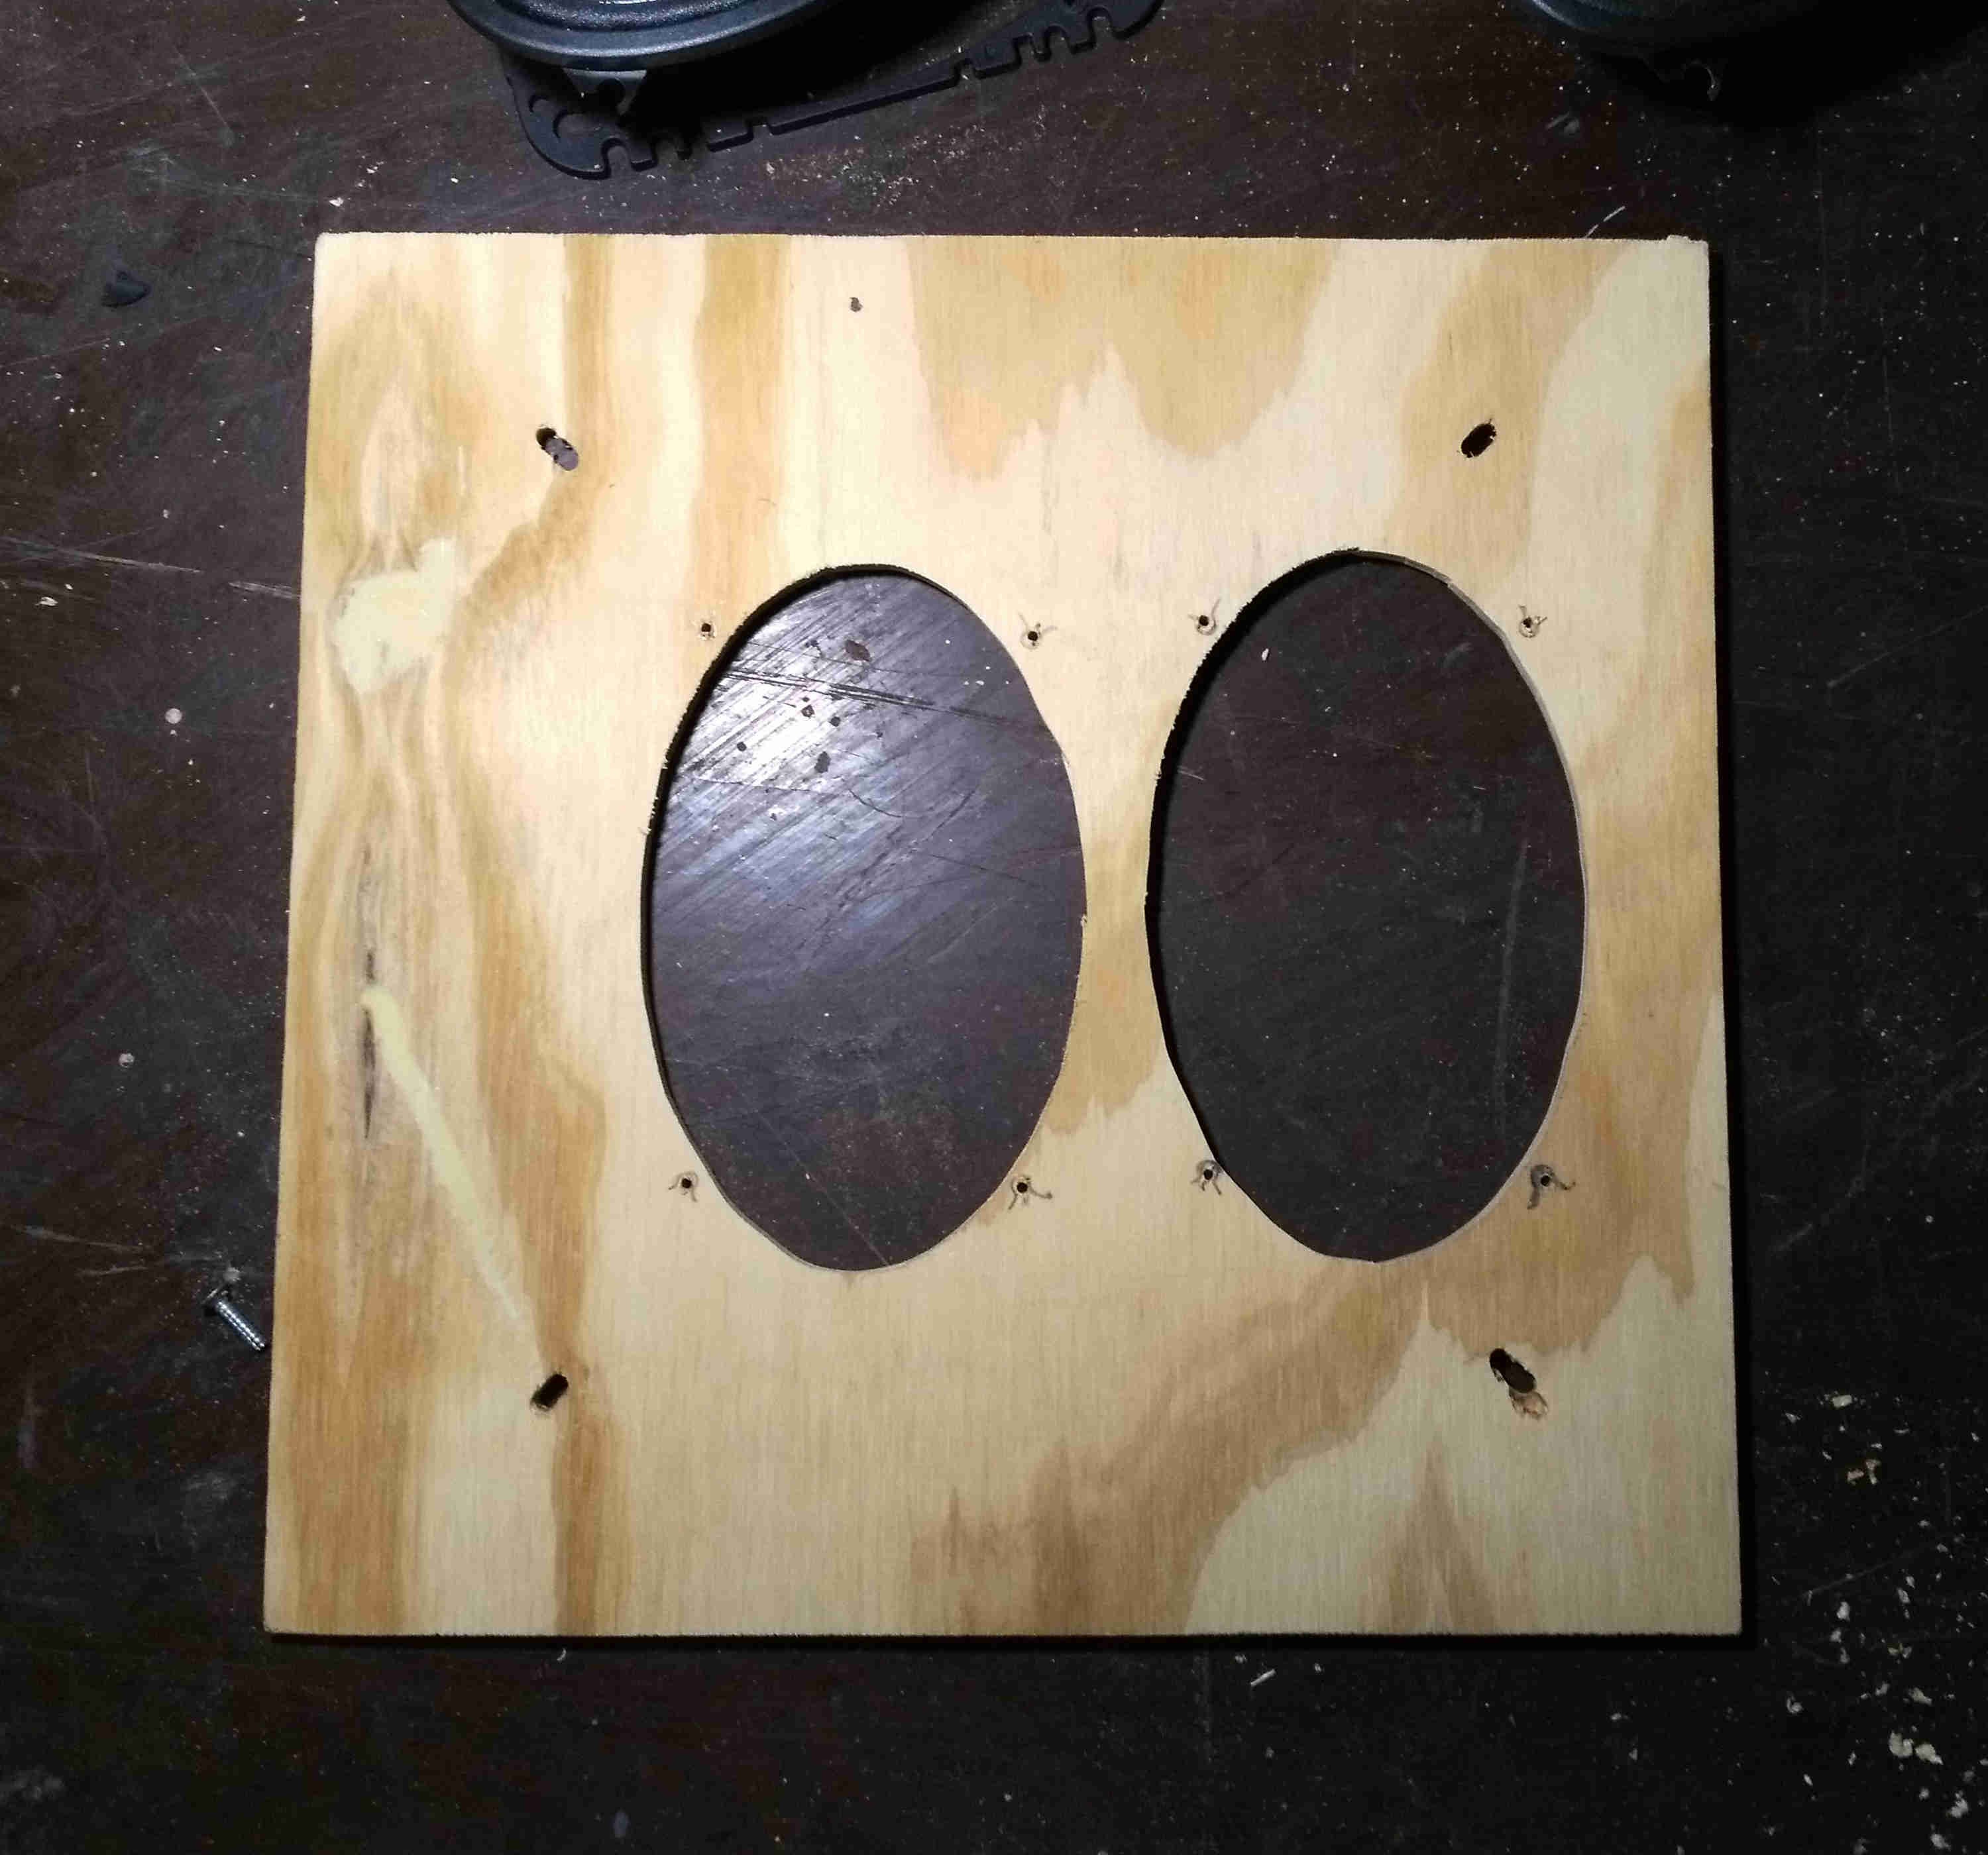 Holes cut out for speakers